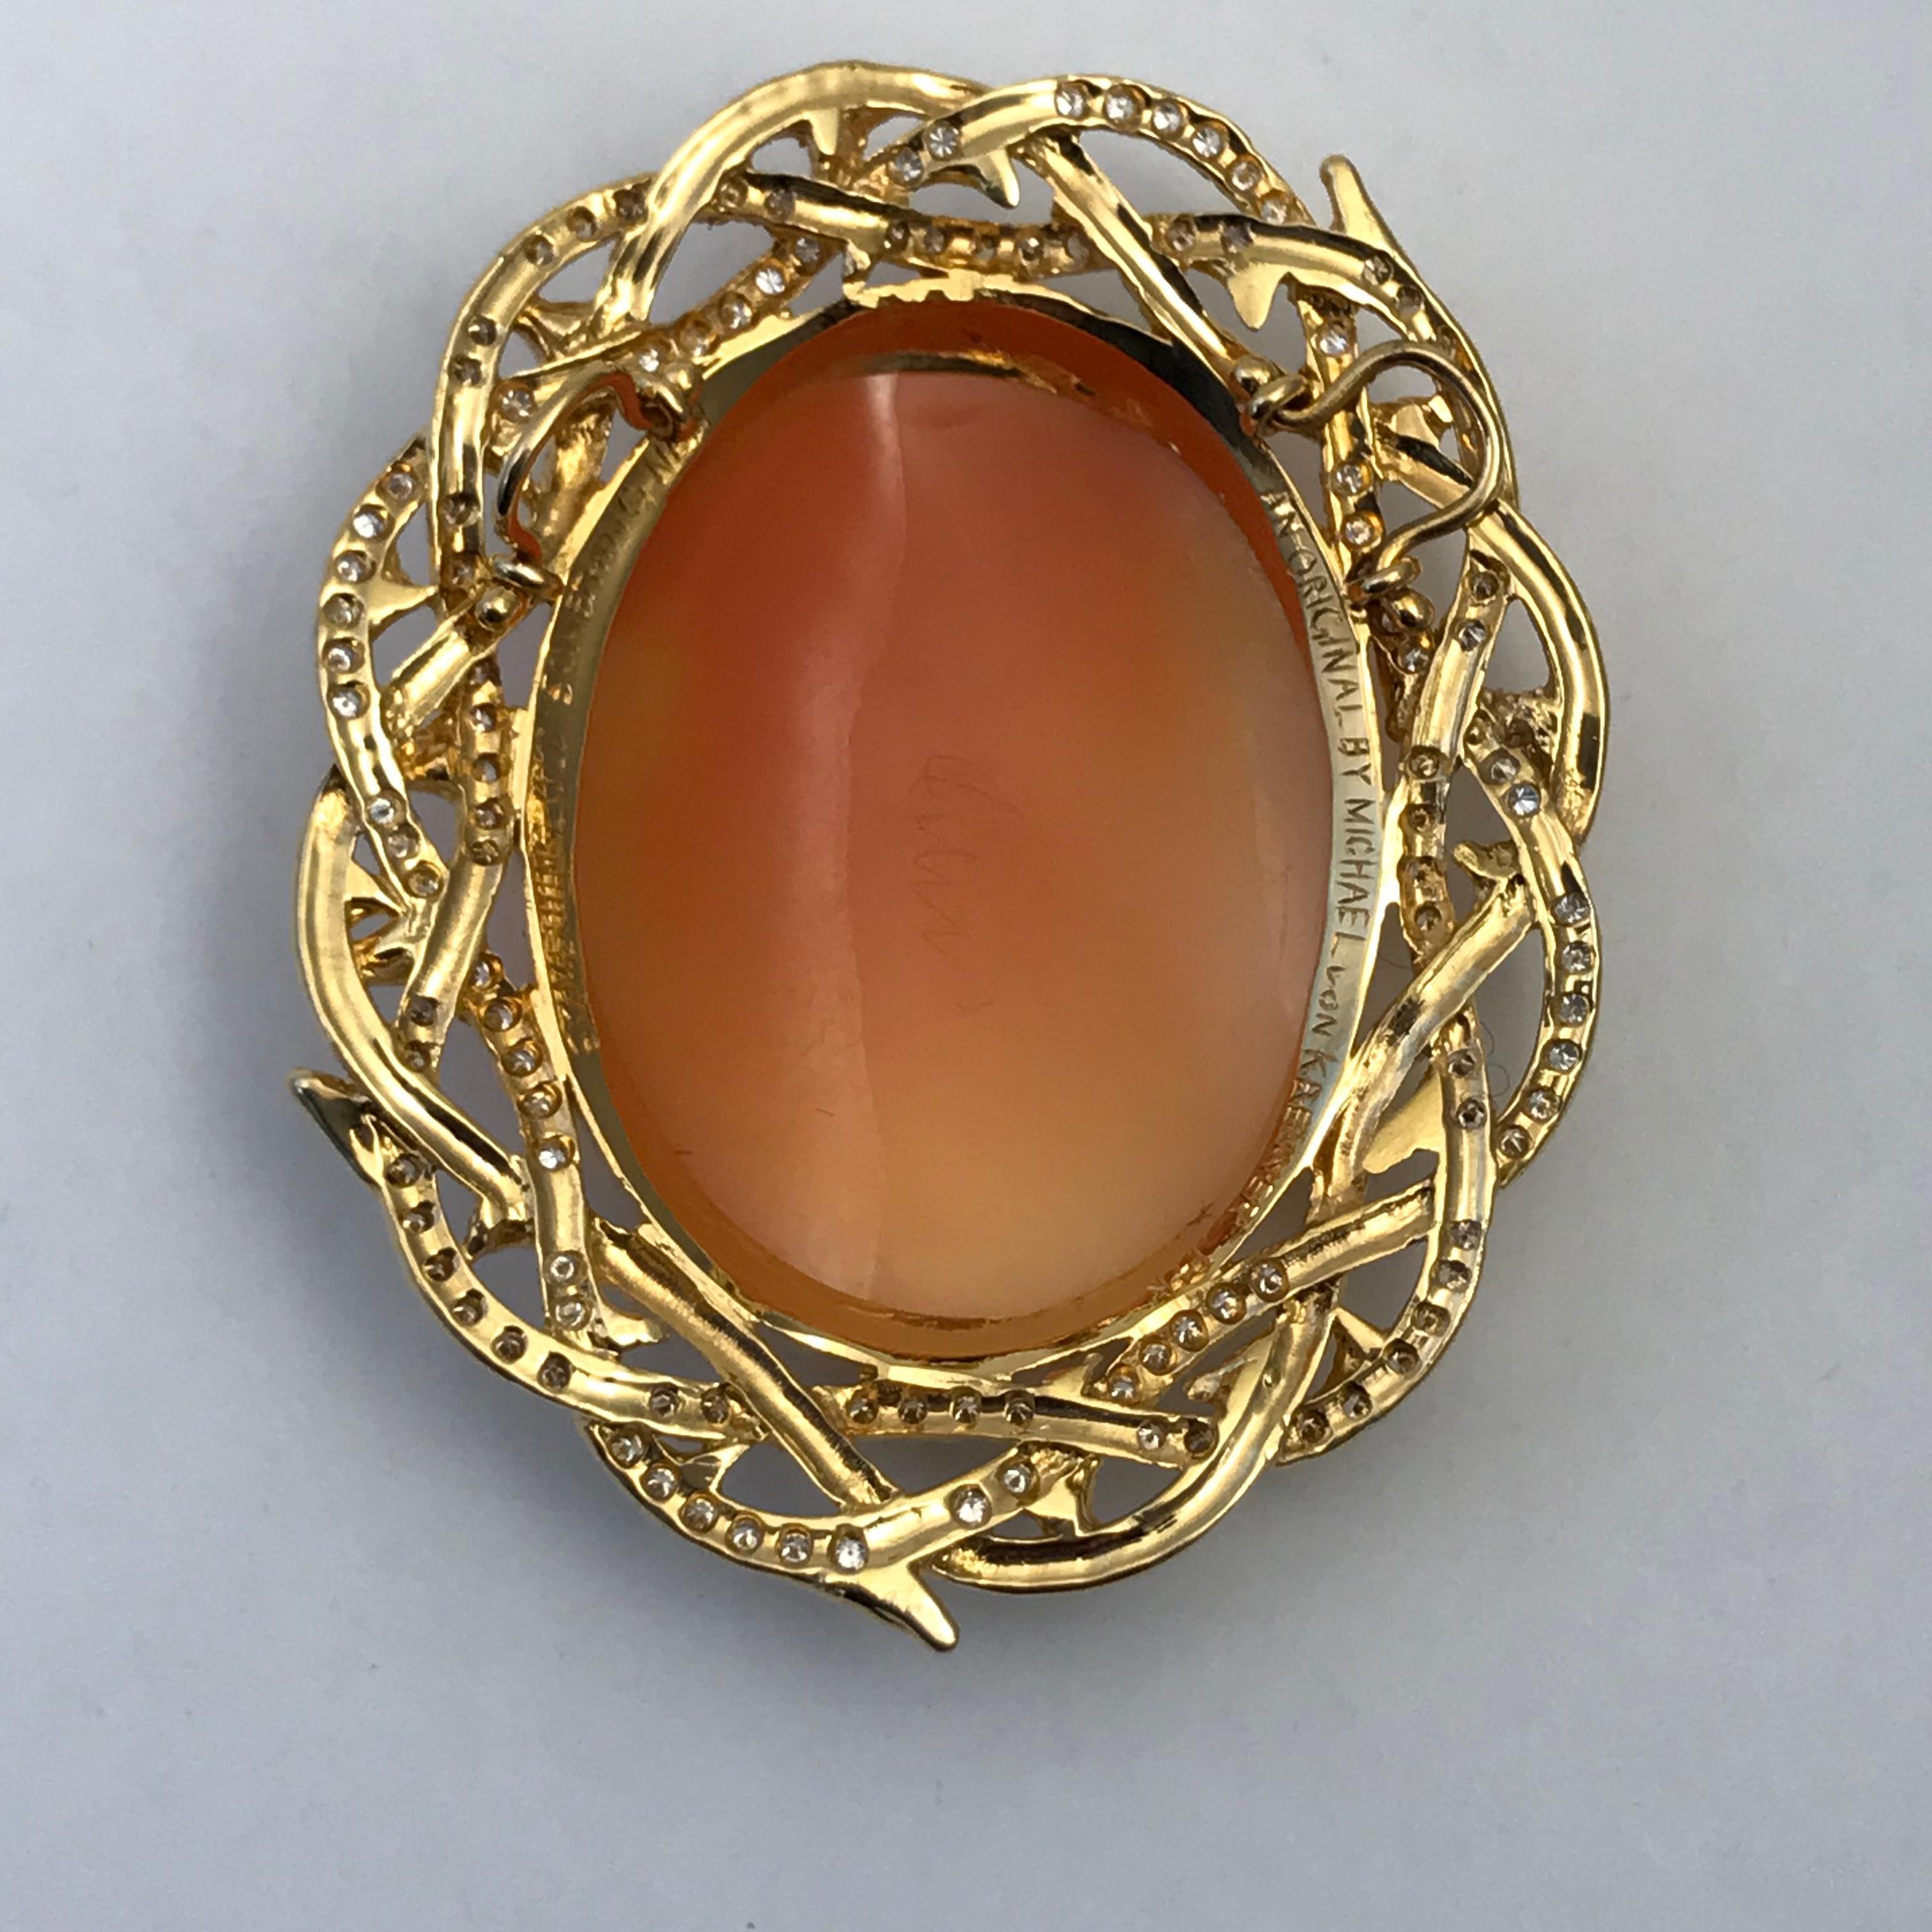 Cameo 1890s Jesus Set in 14 Karat Gold with Diamonds, Rubies and Brown Diamonds For Sale 4